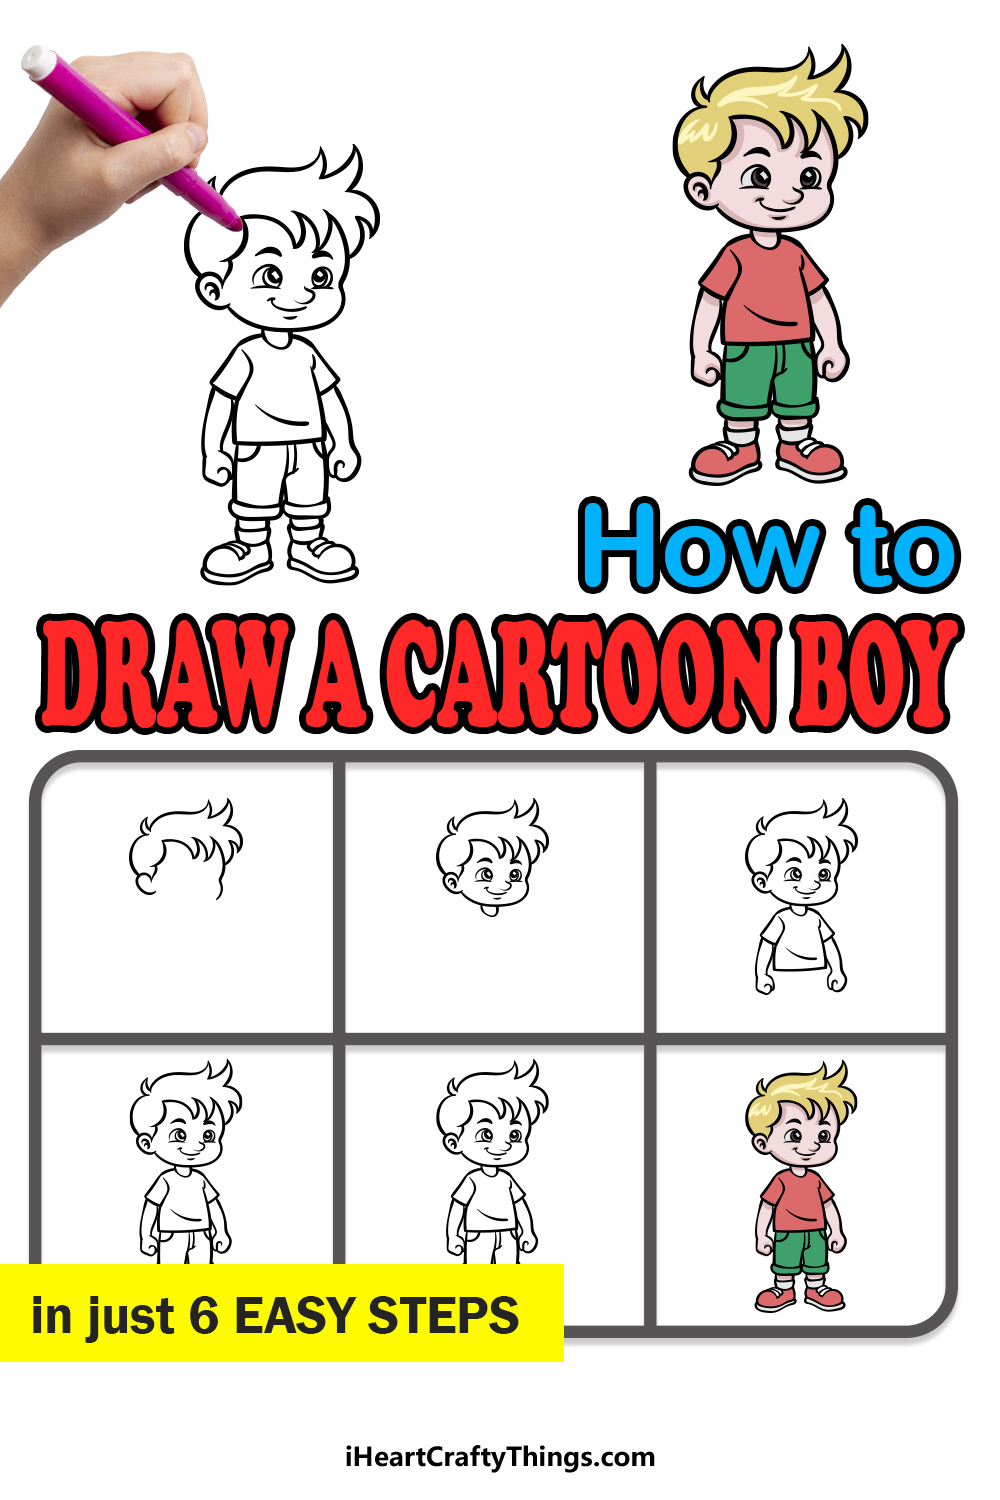 how to draw a cartoon boy in 6 easy steps